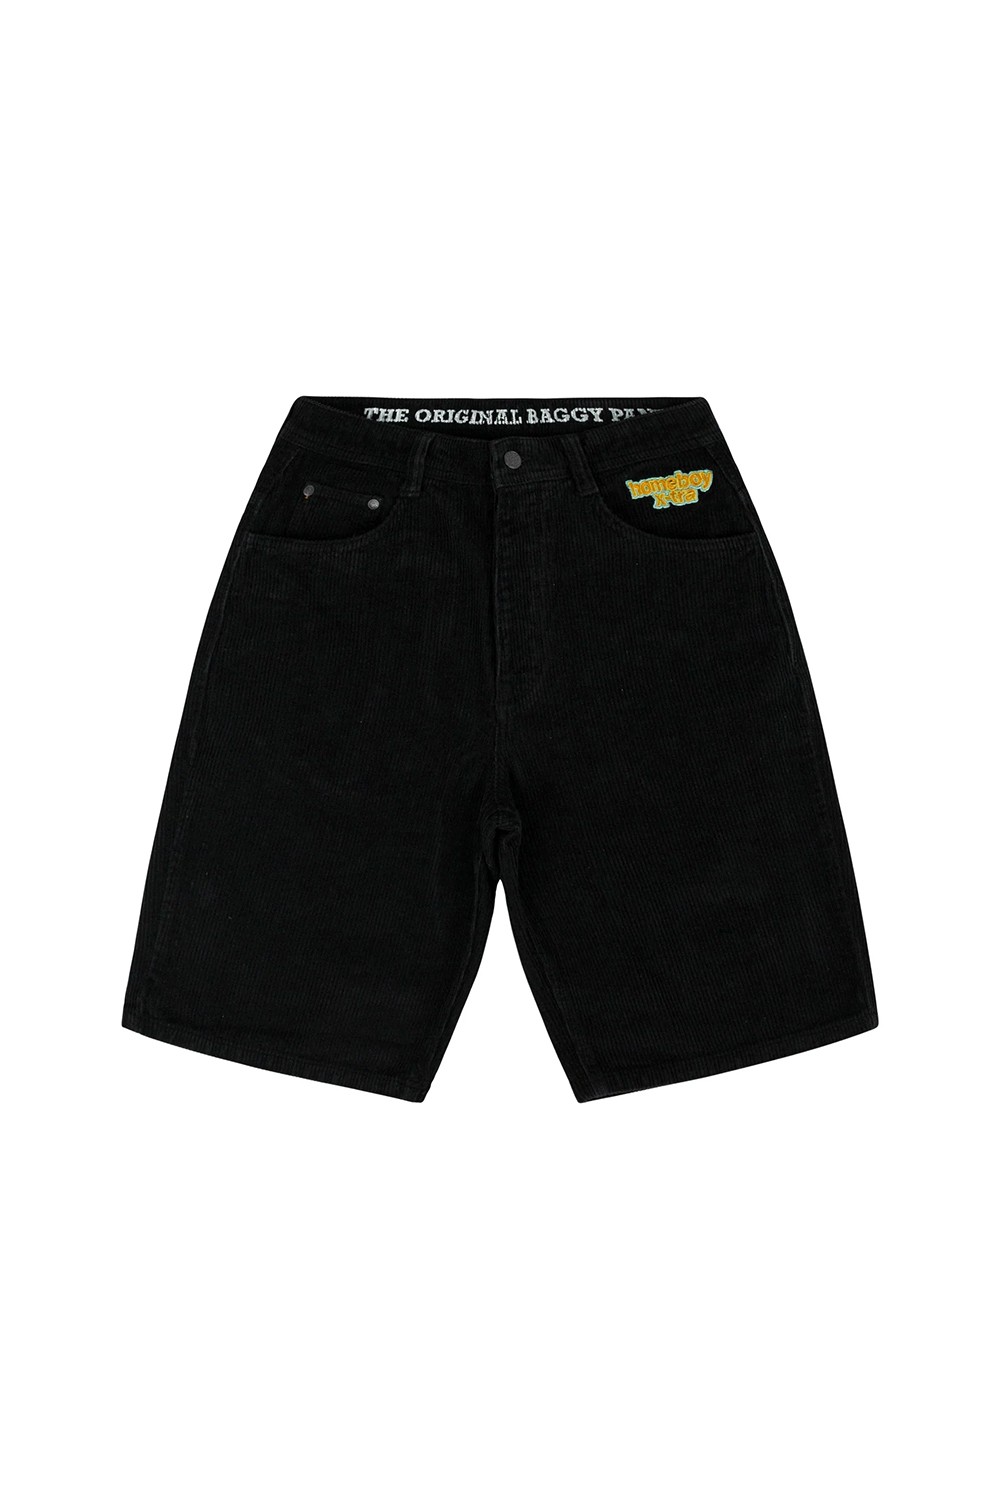 HOMEBOY Baggy Cord Short (HB-BS-1)